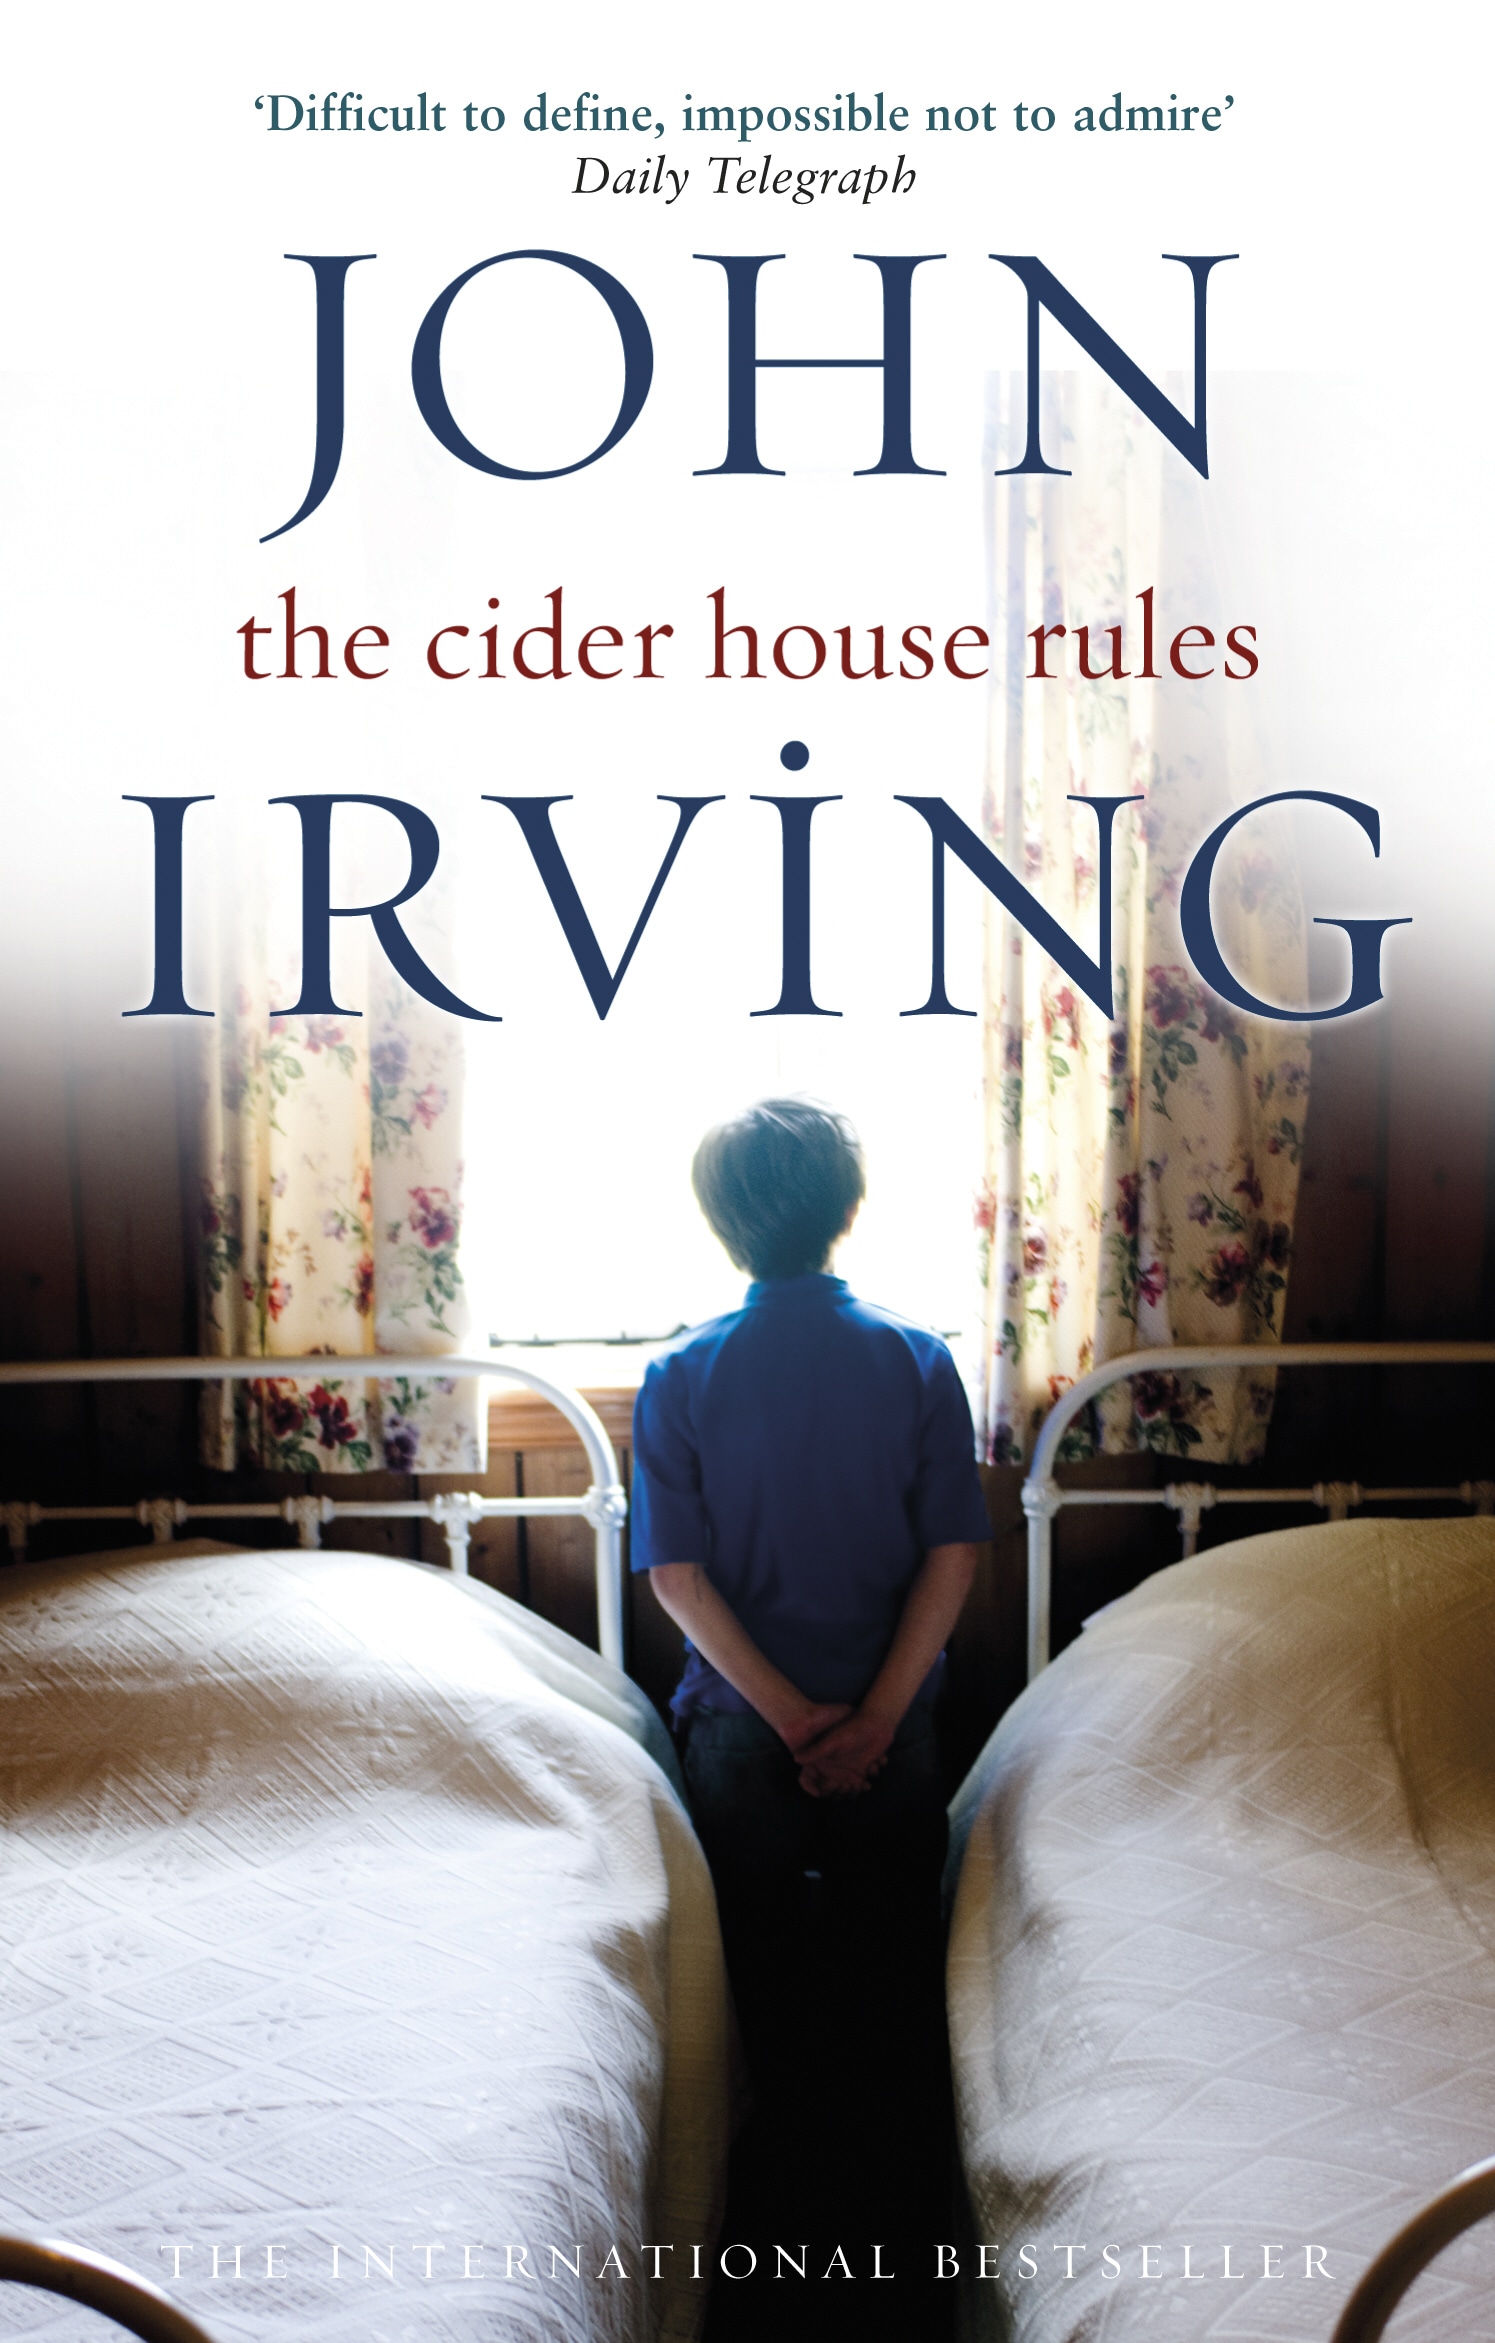 Book “The Cider House Rules” by John Irving — July 1, 1986